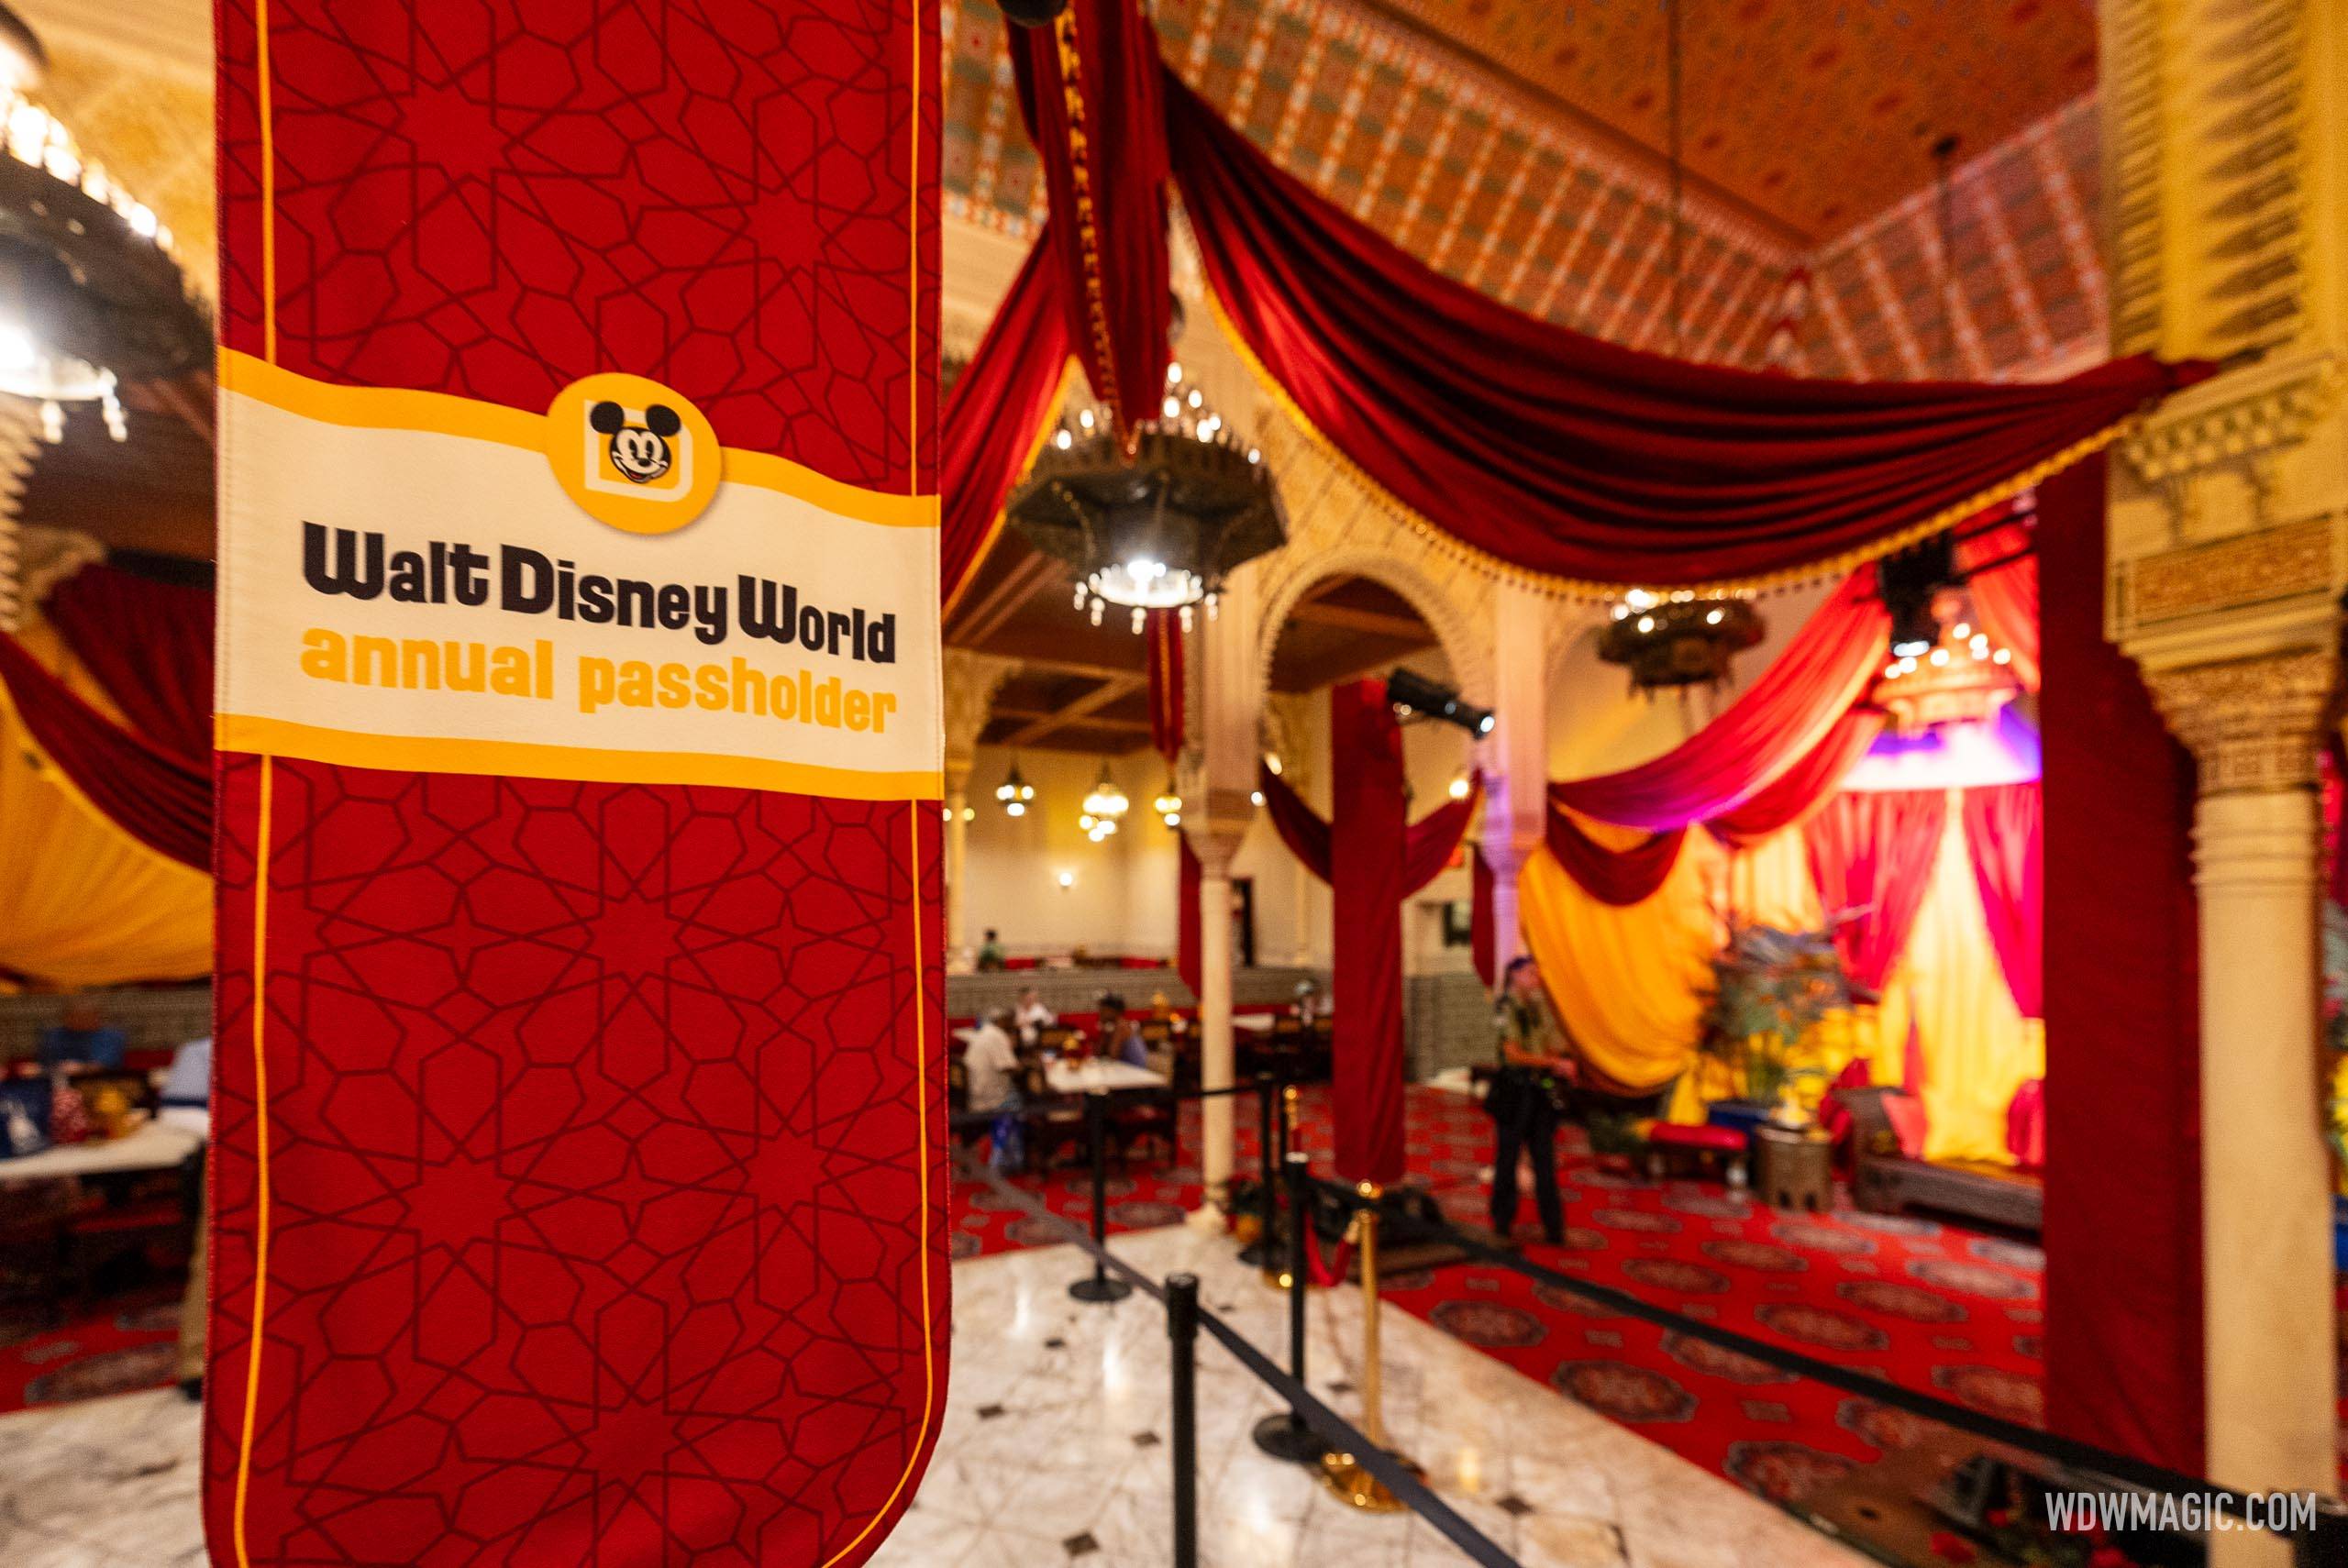 Disney World launches exclusive lounge for Passholders - Free snacks and Character experience included